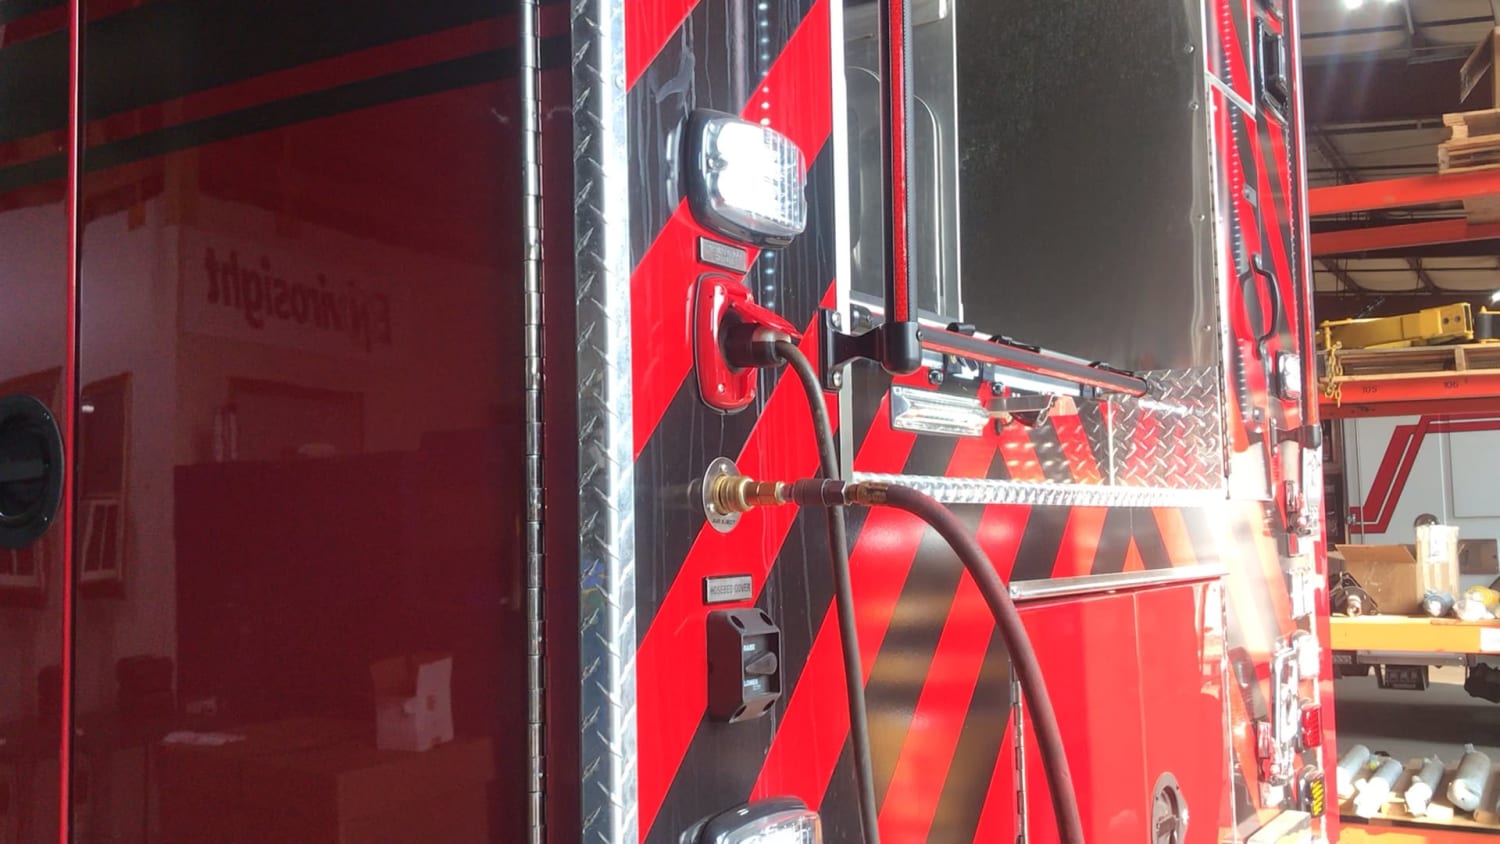 Fire trucks come with auto eject ports for charging and air. As soon as the engine starts both are ejected so there isn’t any time wasted unplugging them.